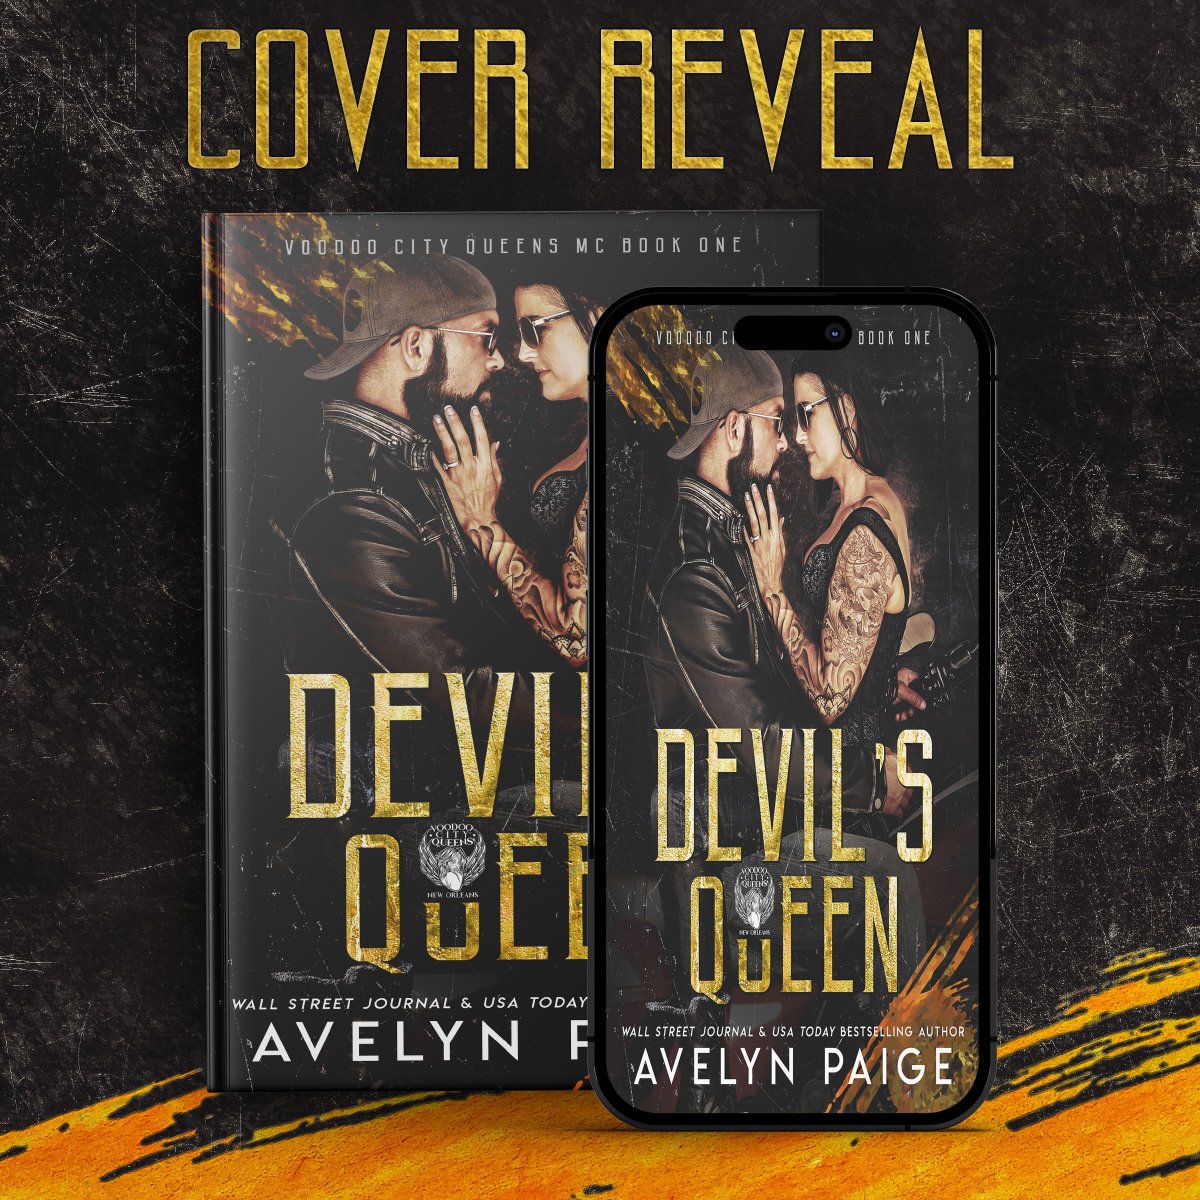 It's #CoverReveal time for Devil's Queen by Avelyn Paige! Coming 2/29!

#Preorder: geni.us/dqevents

#AlphaHero #BadGirl #BadassFMC #BlendedFamily #DarkSecrets @Chaotic_Creativ